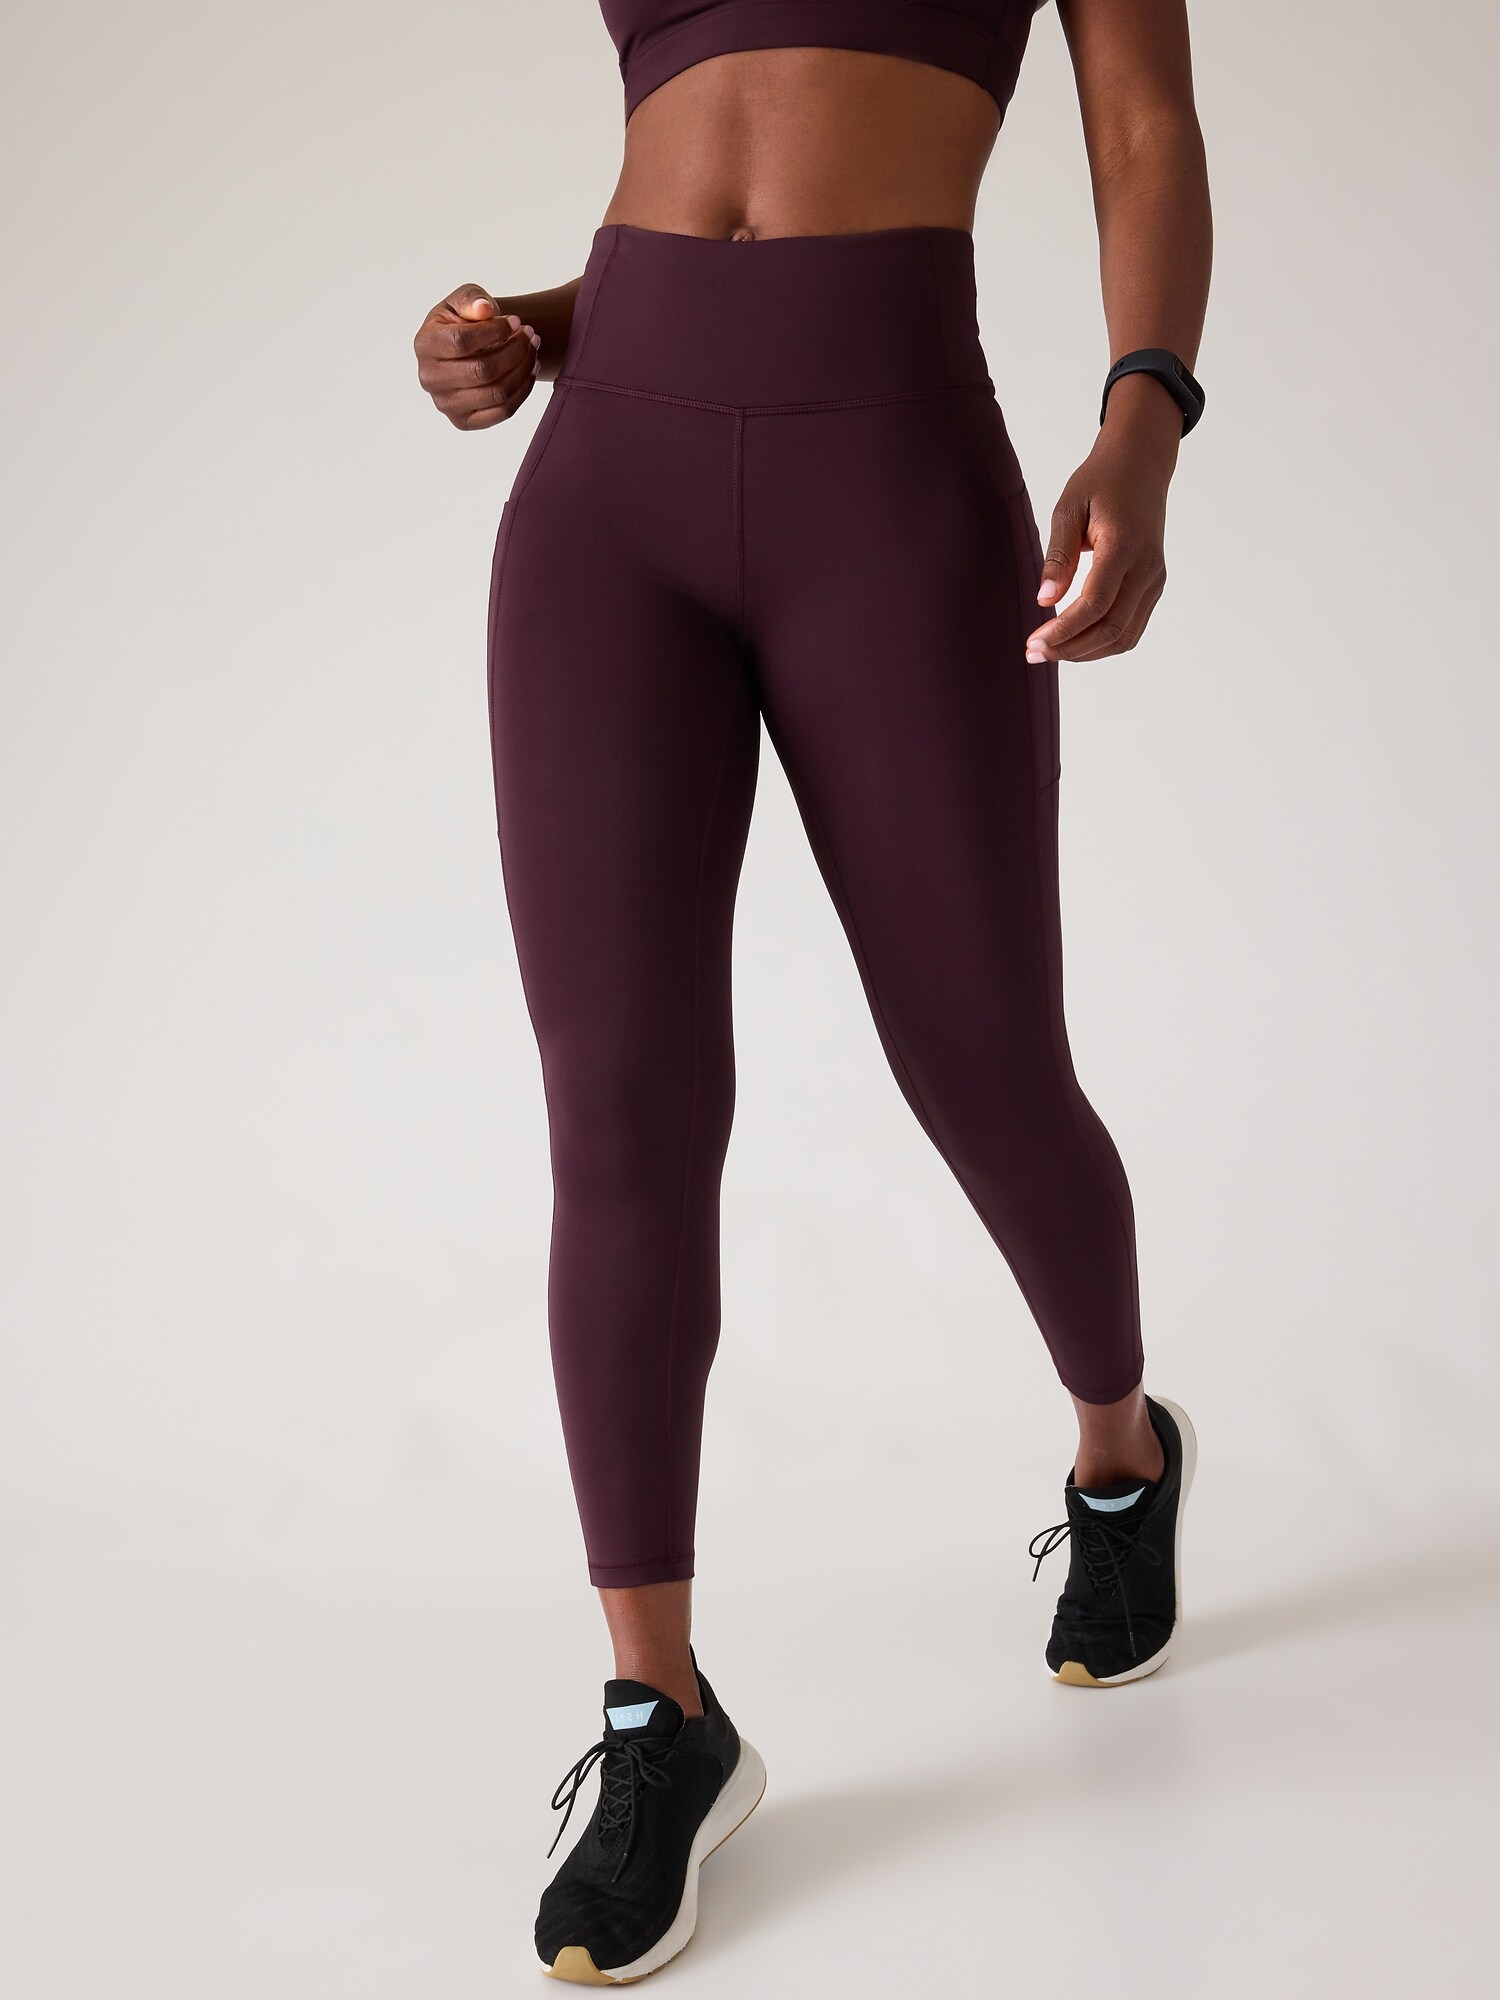 Track lululemon Align™ High-Rise Pant with Pockets 25 - dramatic